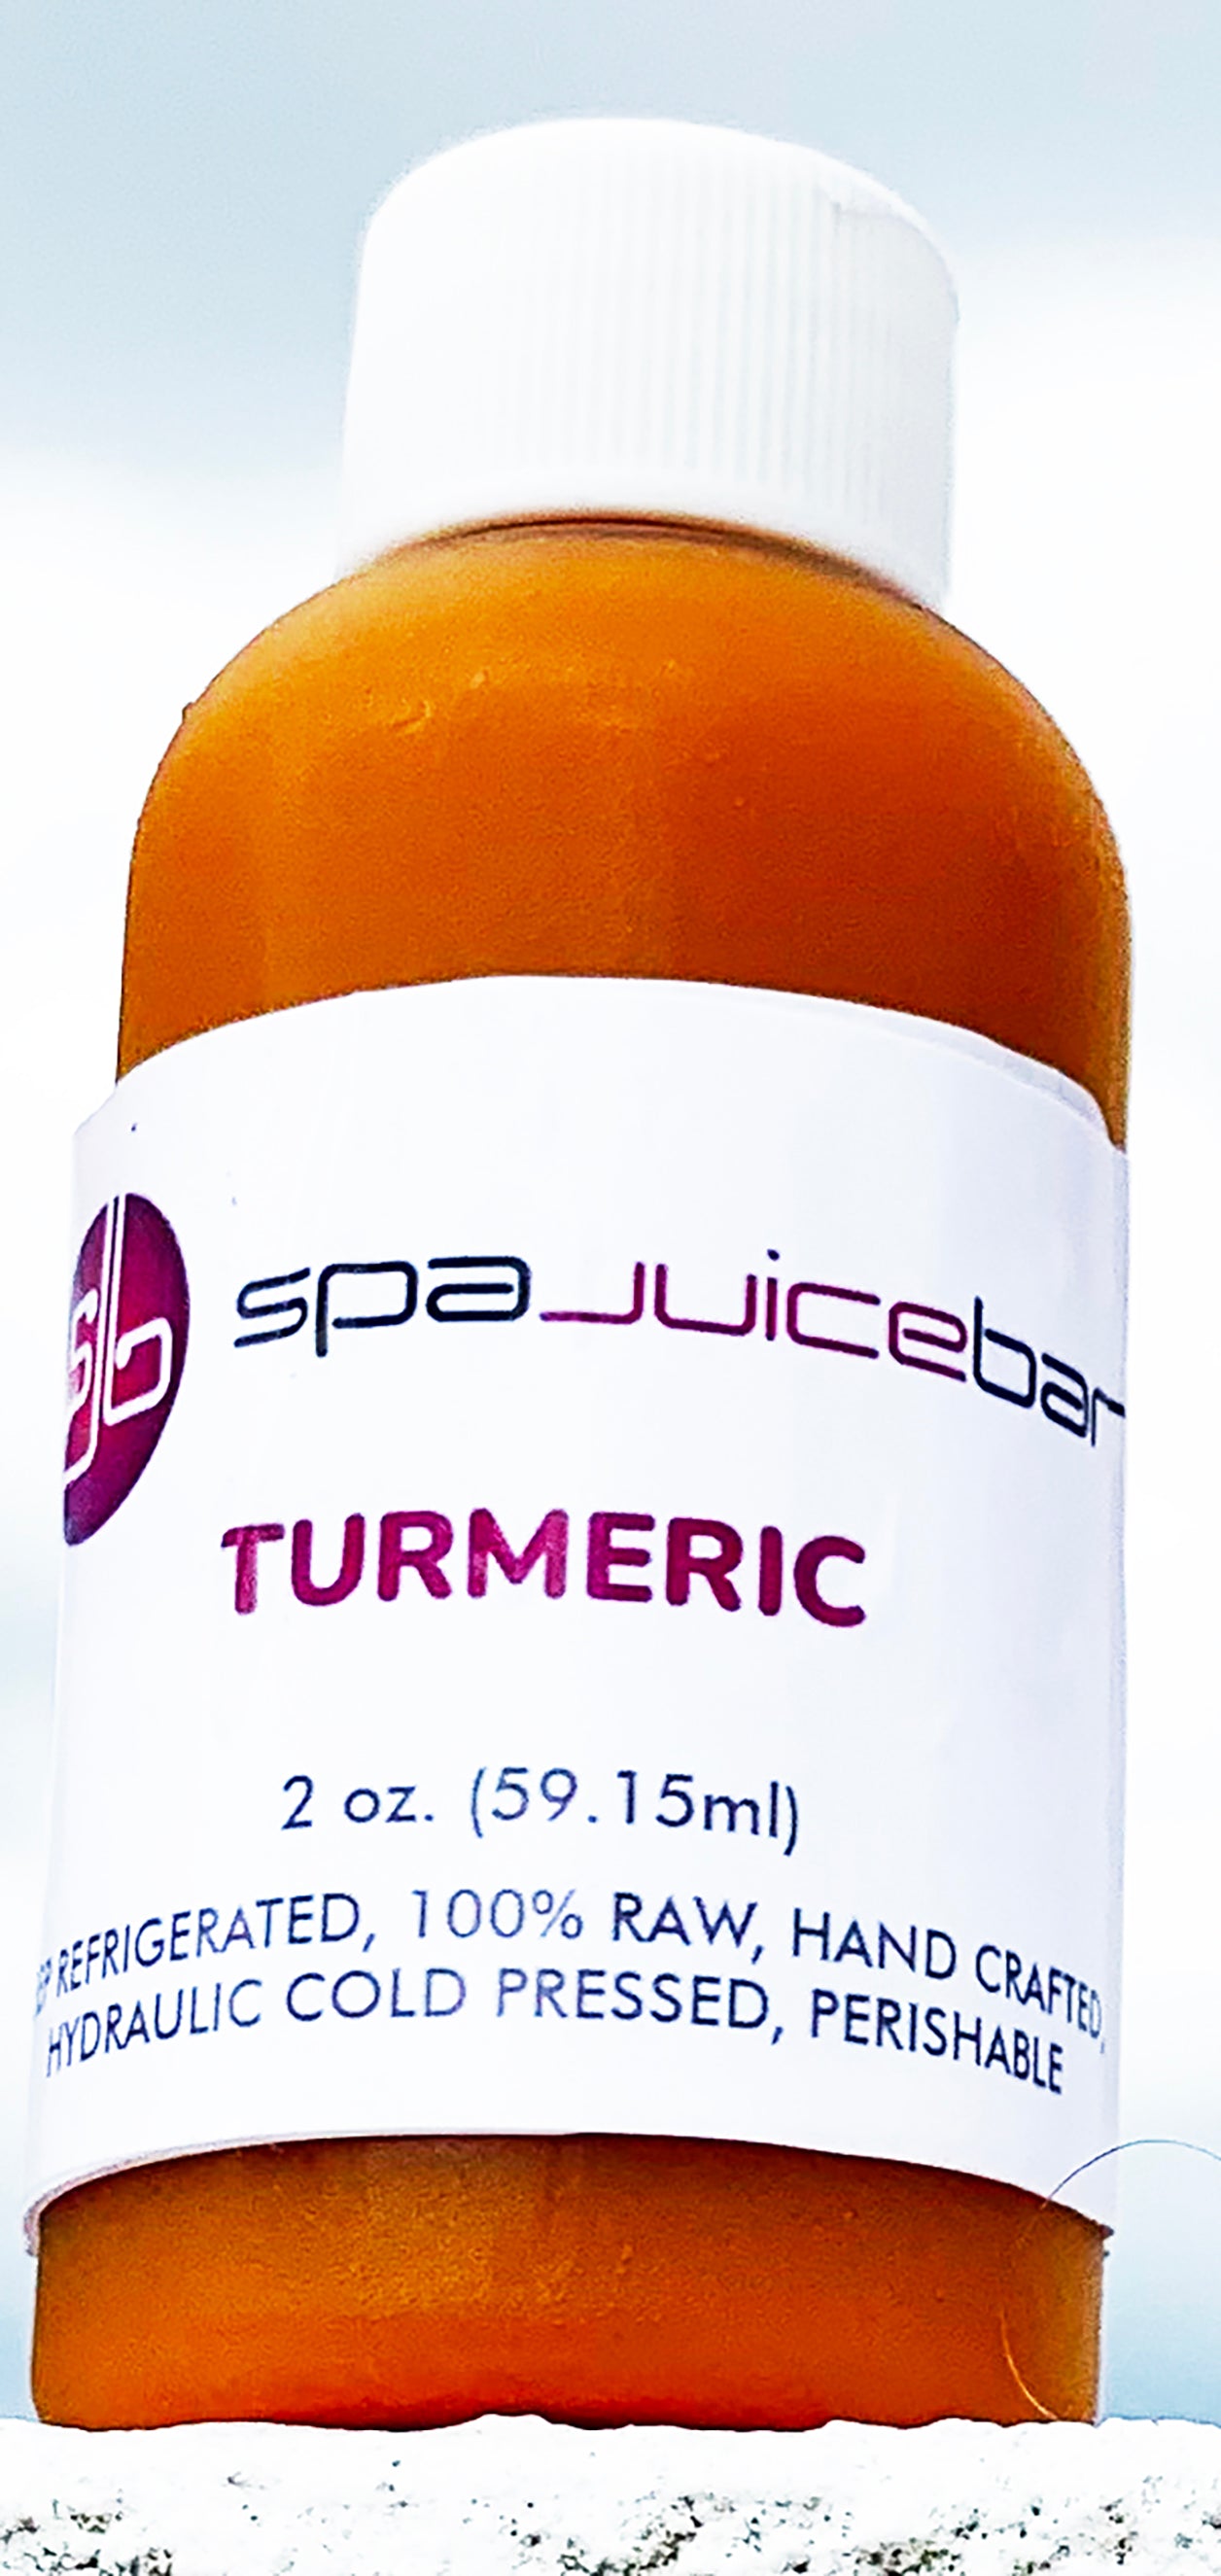 SpaJuiceBar cold pressed turmeric juice in a 2oz bottle. Turmeric is known to combat inflammation.